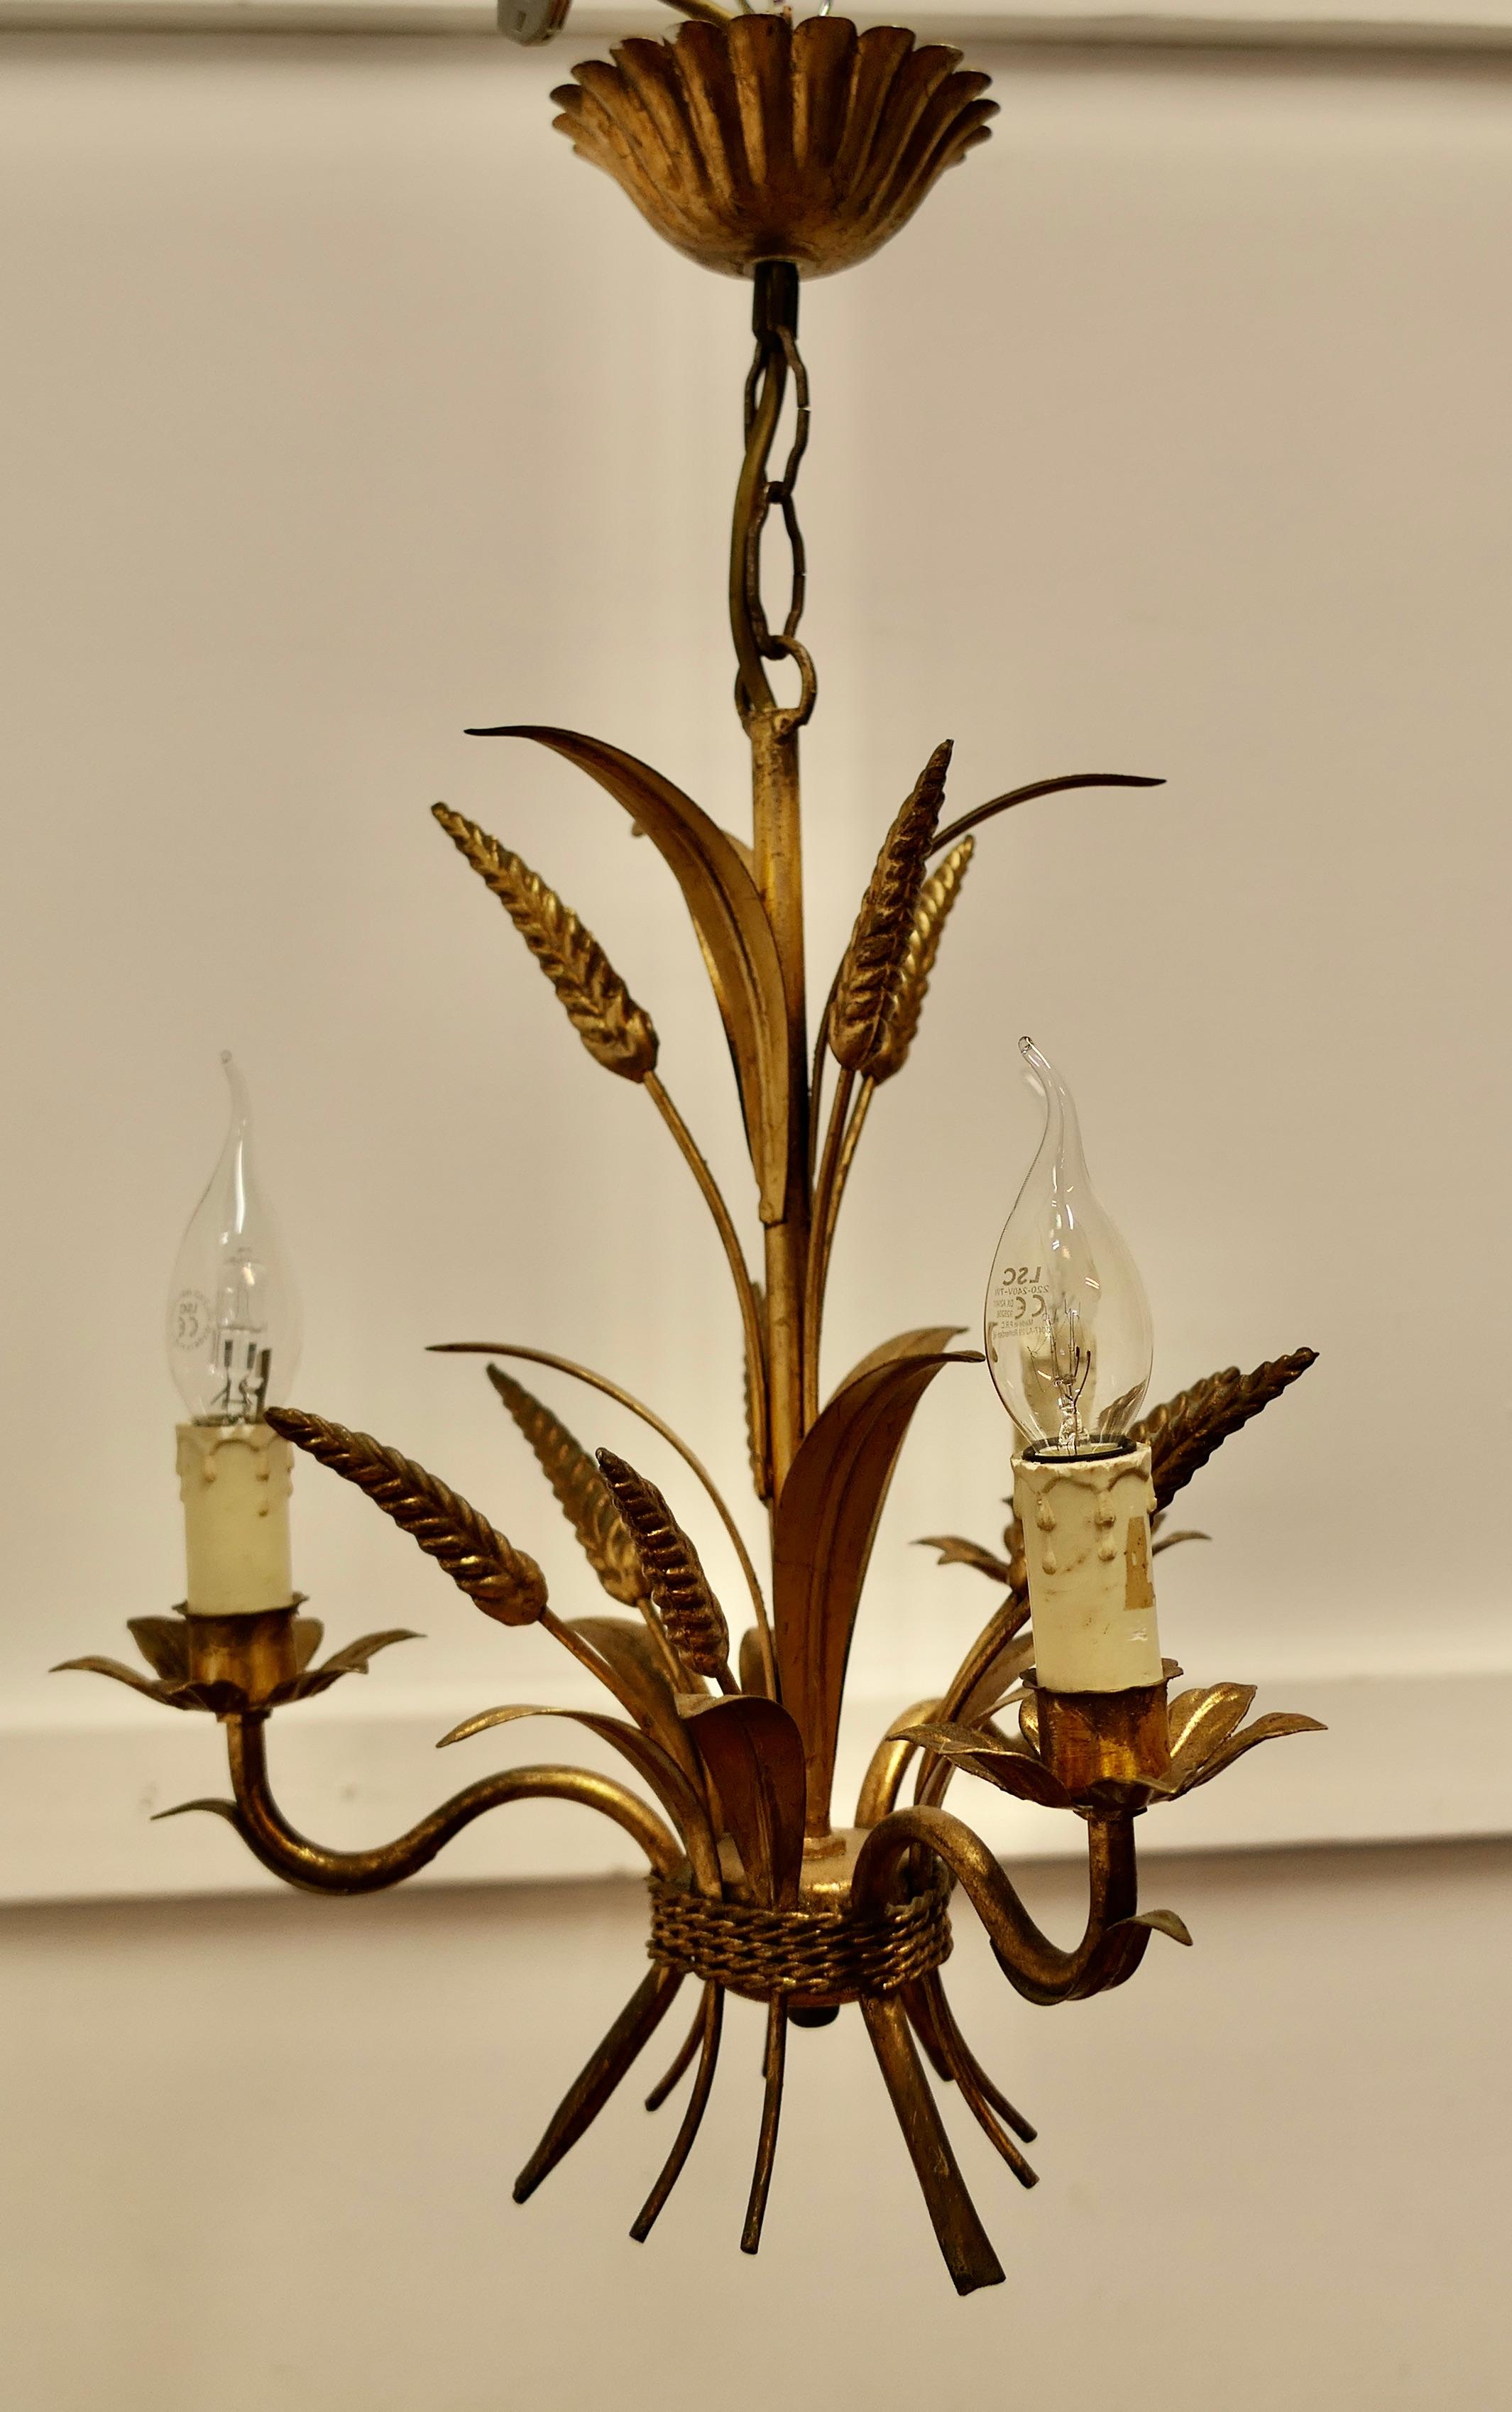 A Pair of Matching French Toleware Gilded Pendant Lights

These are very pretty 3 branch Harvest lights, they are decorated with curled leaves and wheat sheaves tied with twisted twine 
The lights are all working and will need to be connected to an